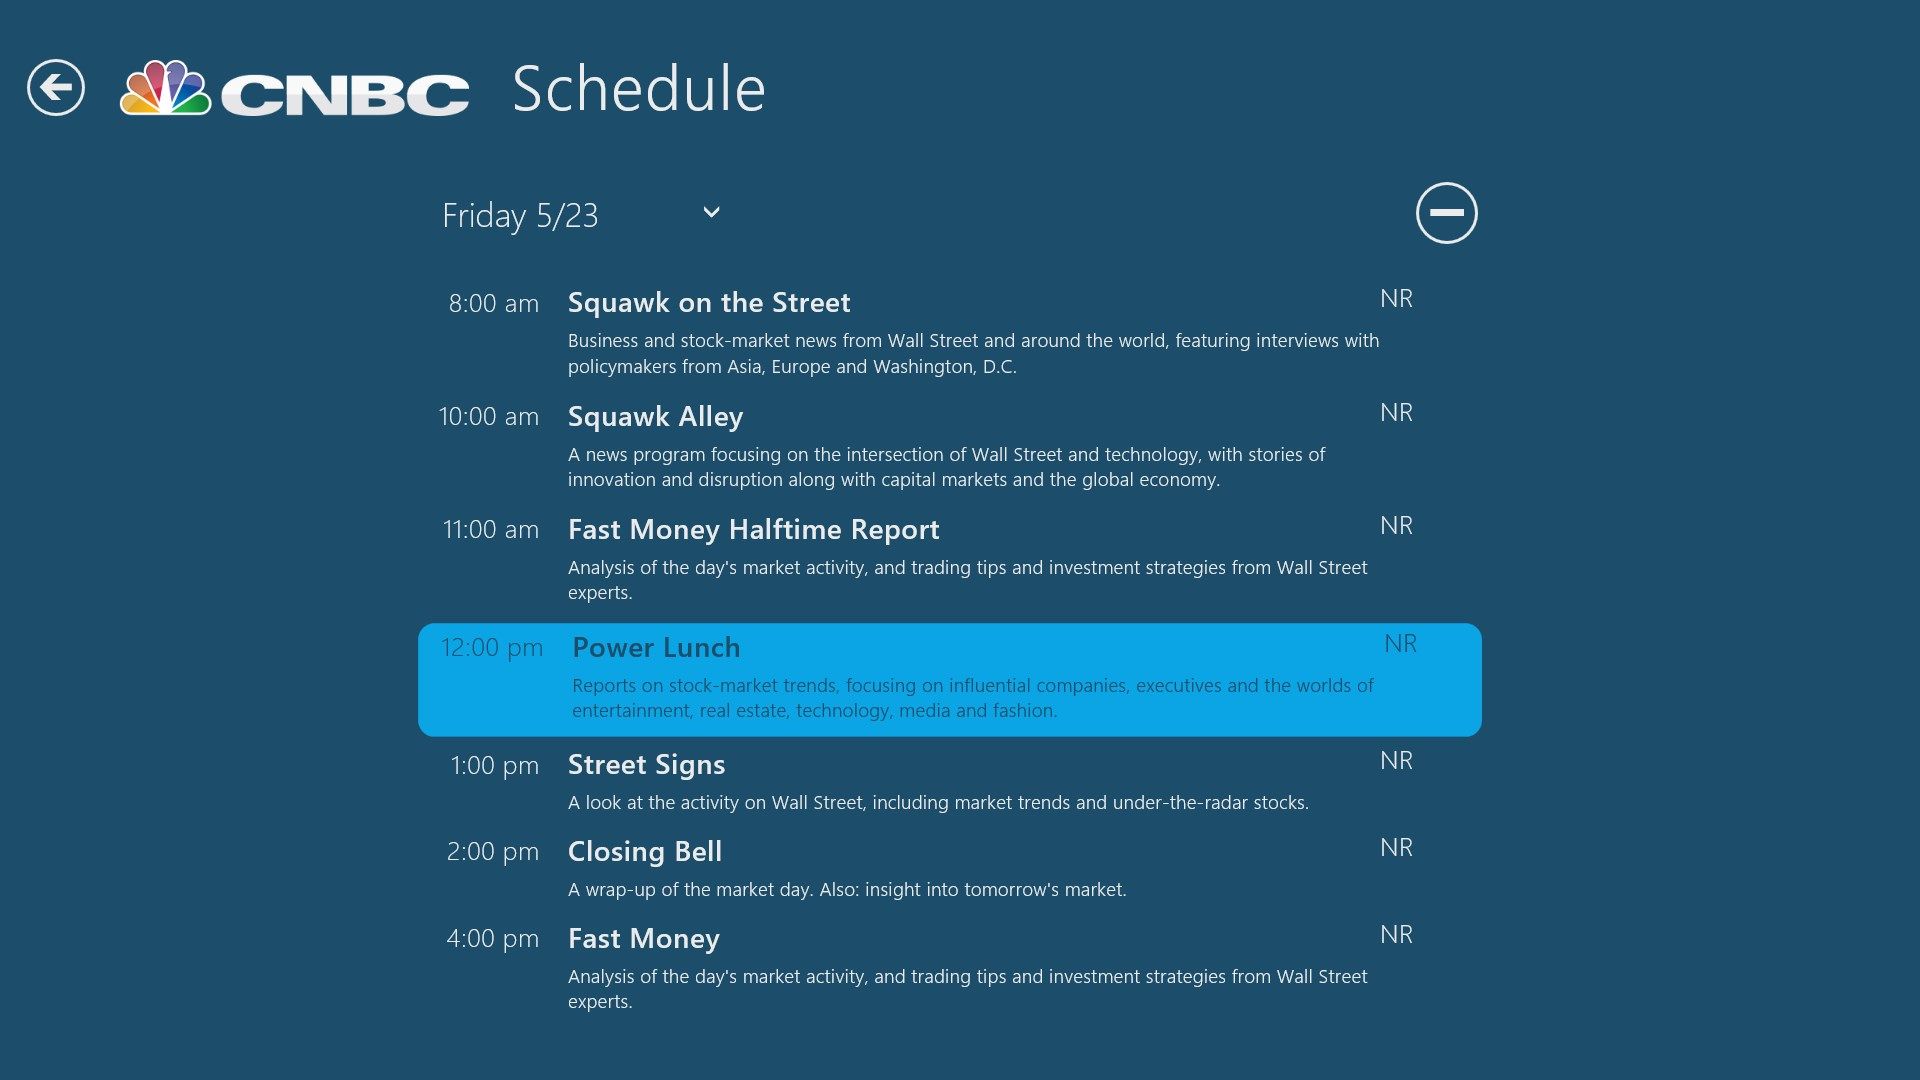 Access CNBC’s program schedule to see what time your favorite shows air.